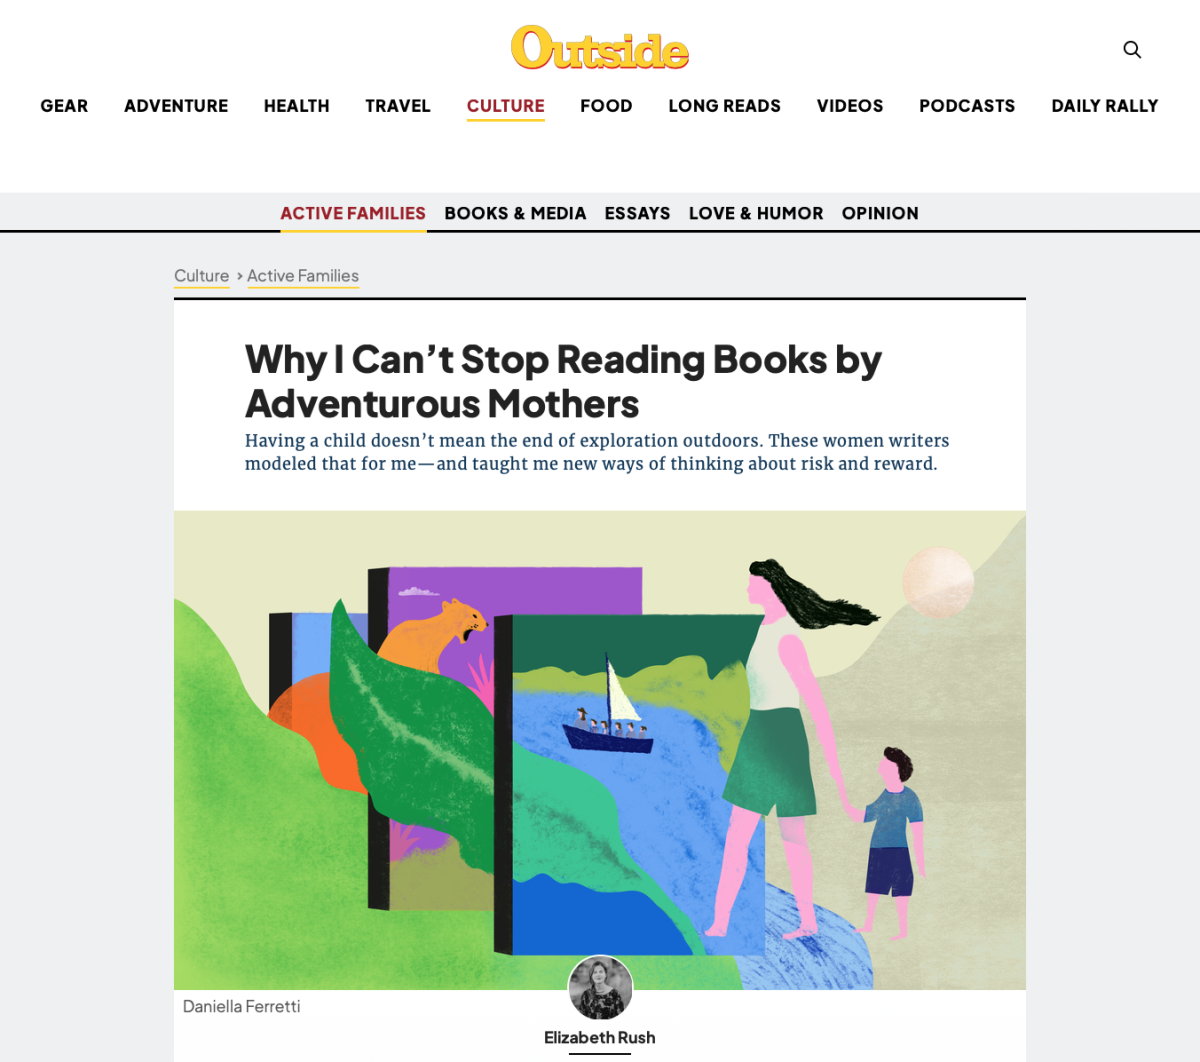 Outside Magazine / Why I Can’t Stop Reading Books by Adventurous Mothers - Daniella Ferretti - Anna Goodson Illustration Agency